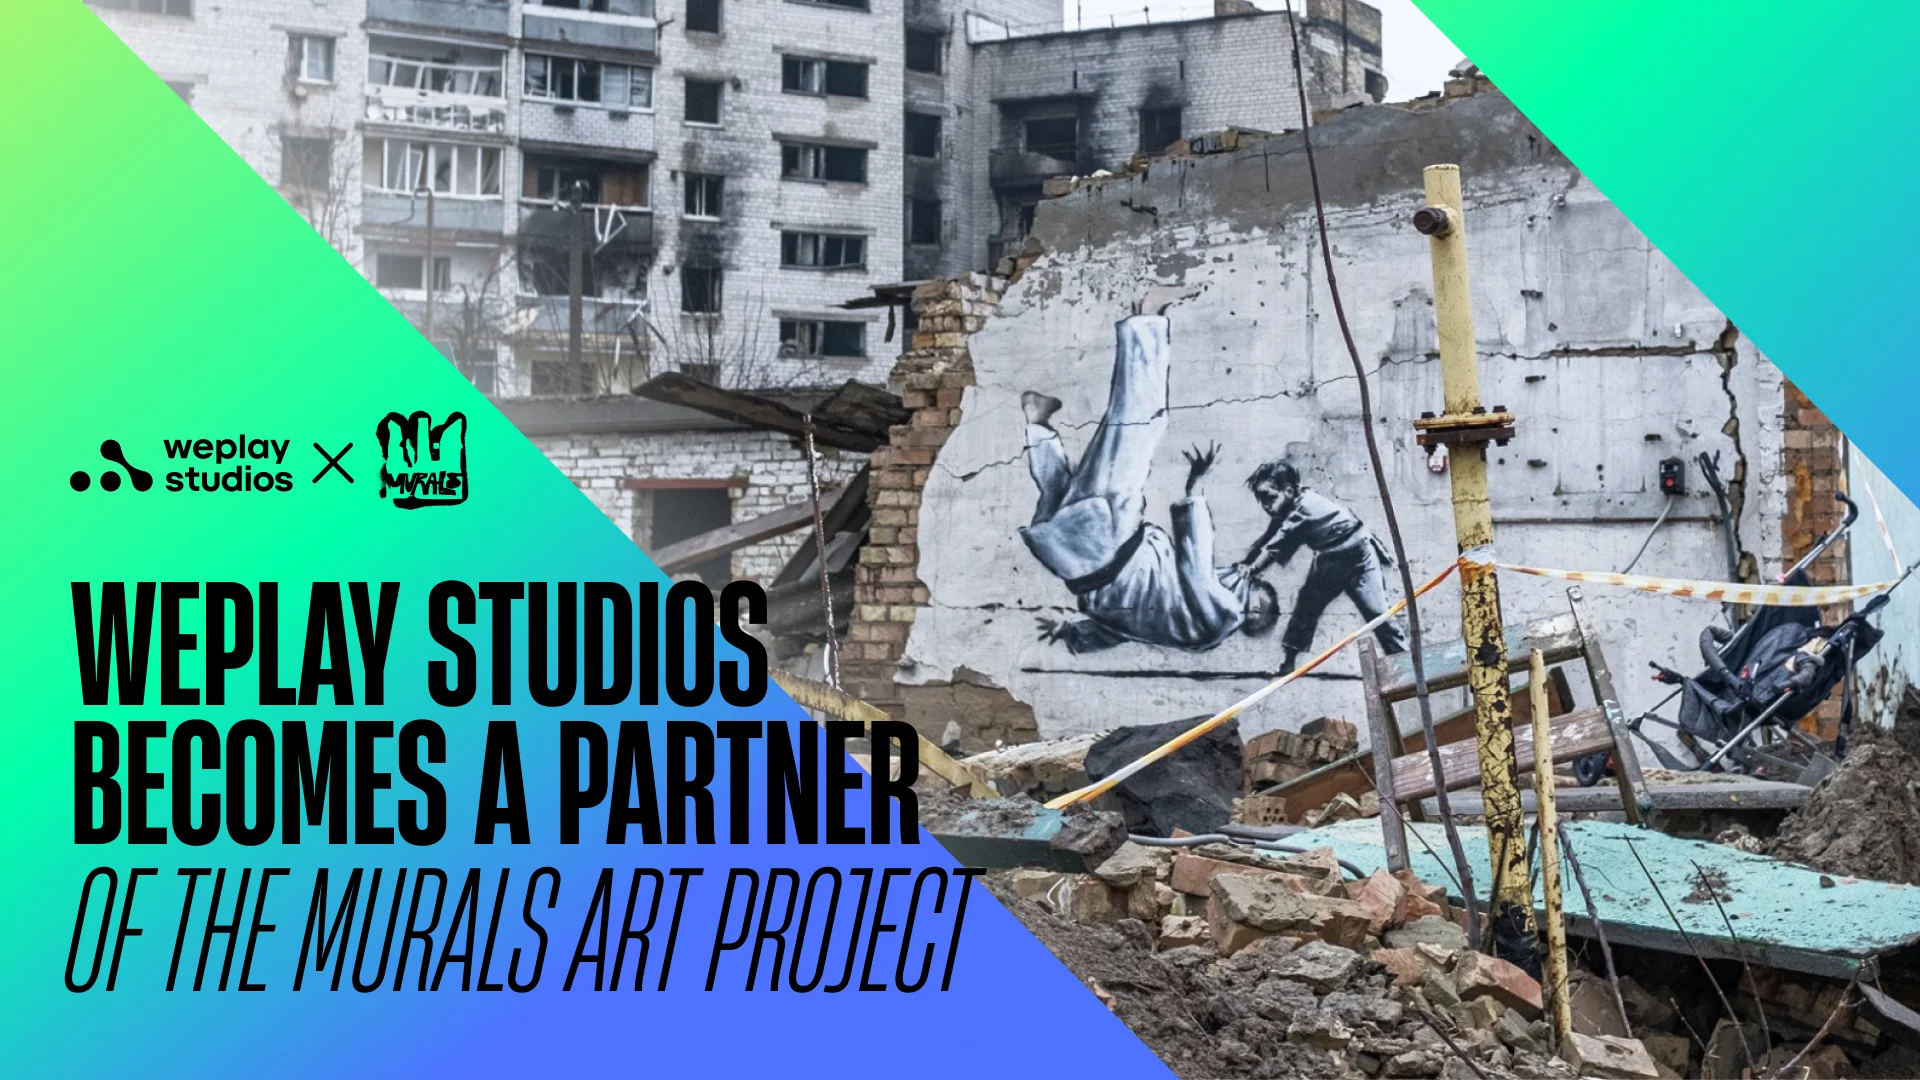 WePlay Studios becomes a partner of the MURALS art project. Visual: WePlay Studios